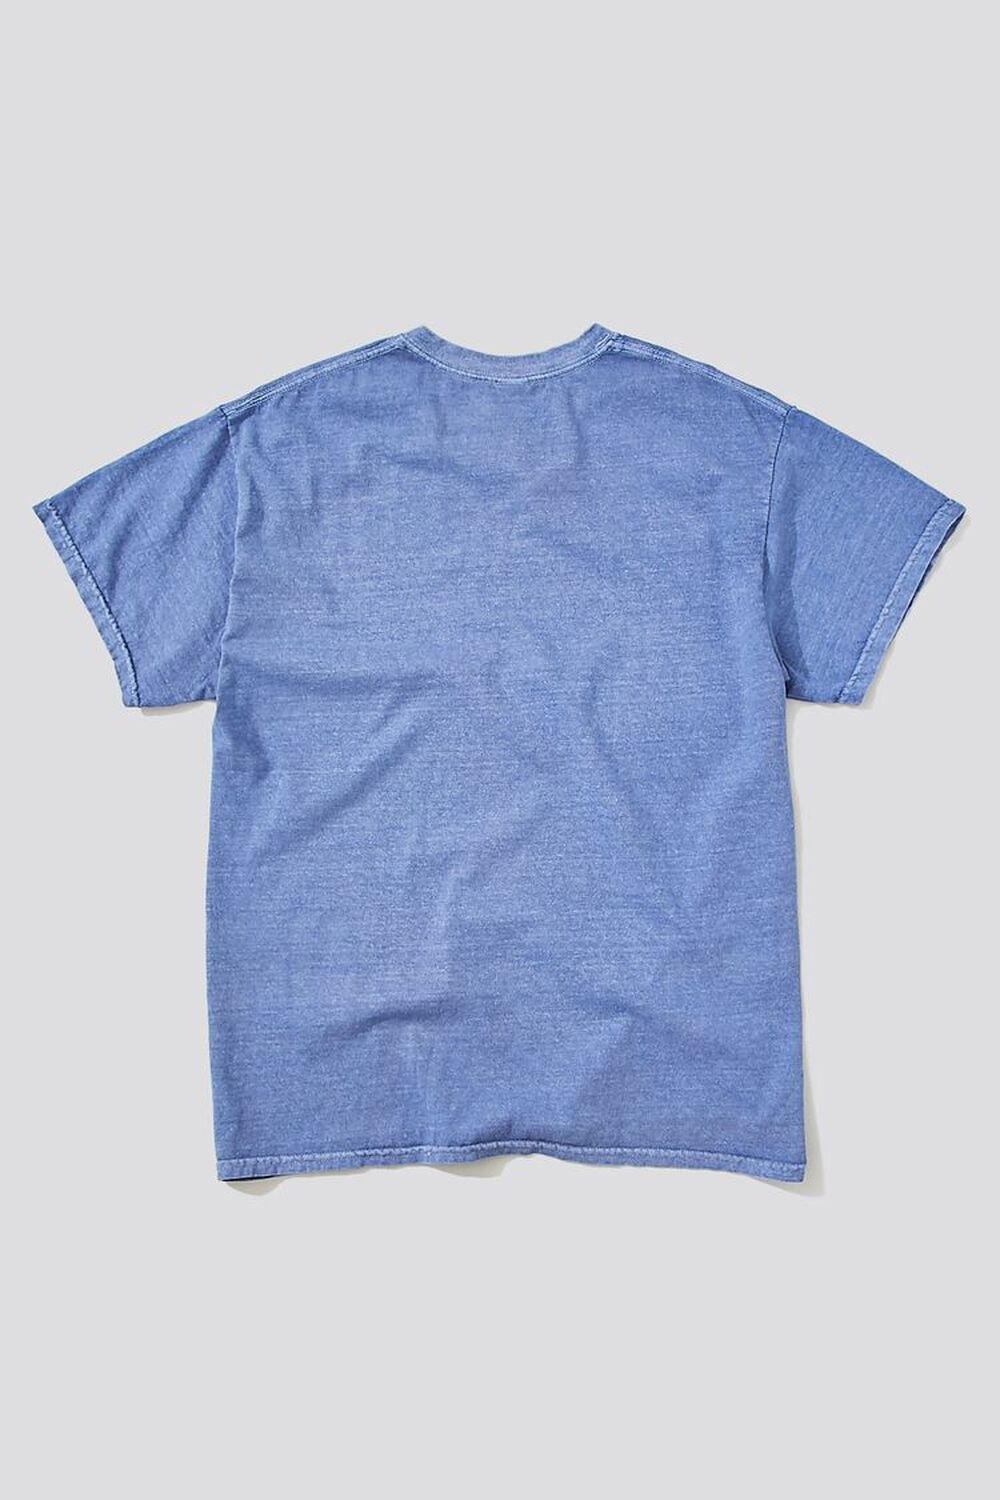 BLUE/MULTI Eazy-E Graphic Mineral Wash Tee, image 2